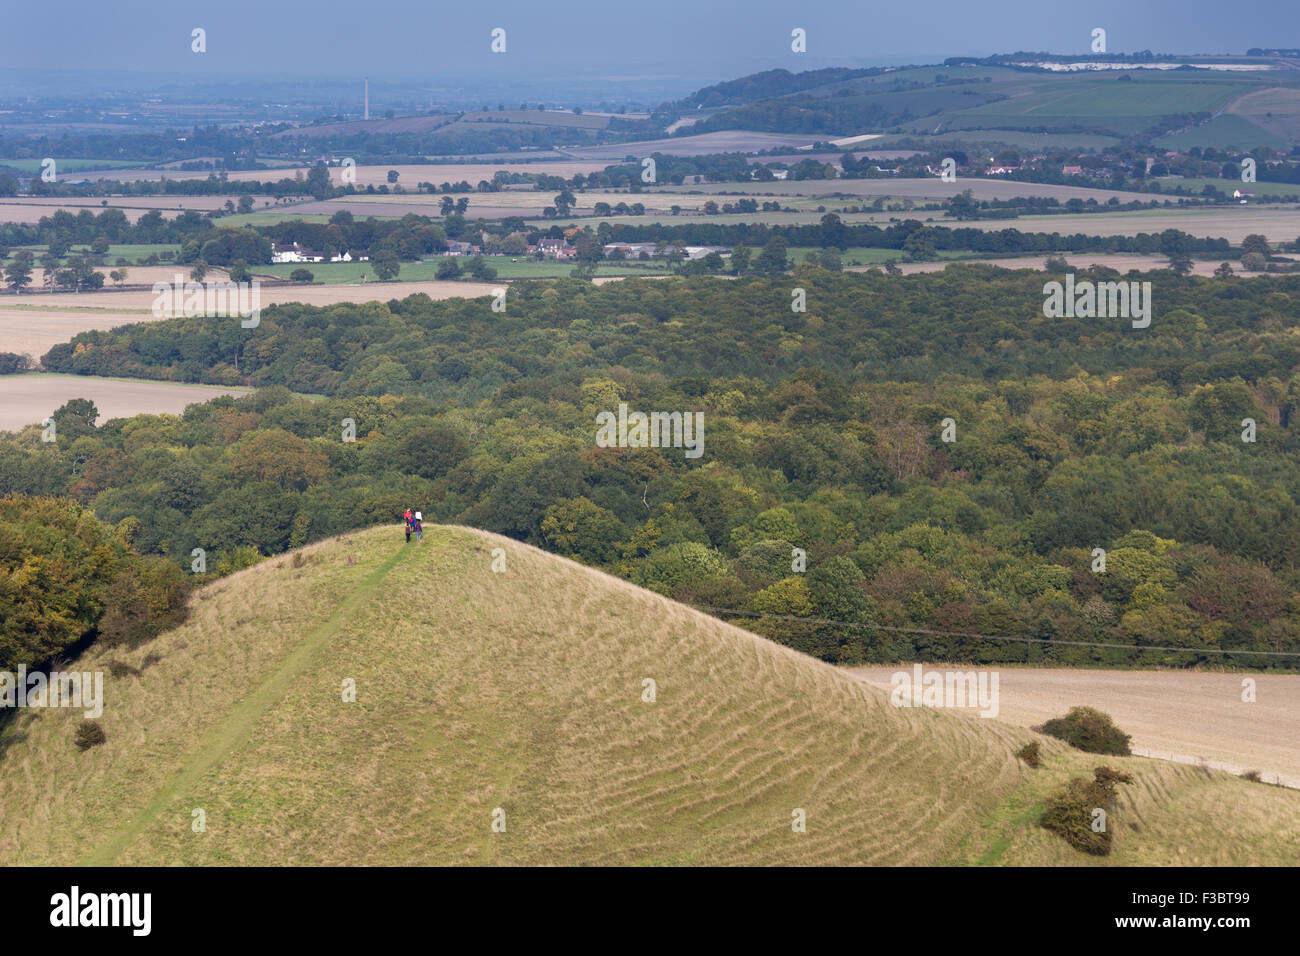 Cley Hill High Resolution Stock Photography and Images - Alamy Famous Crop Circle